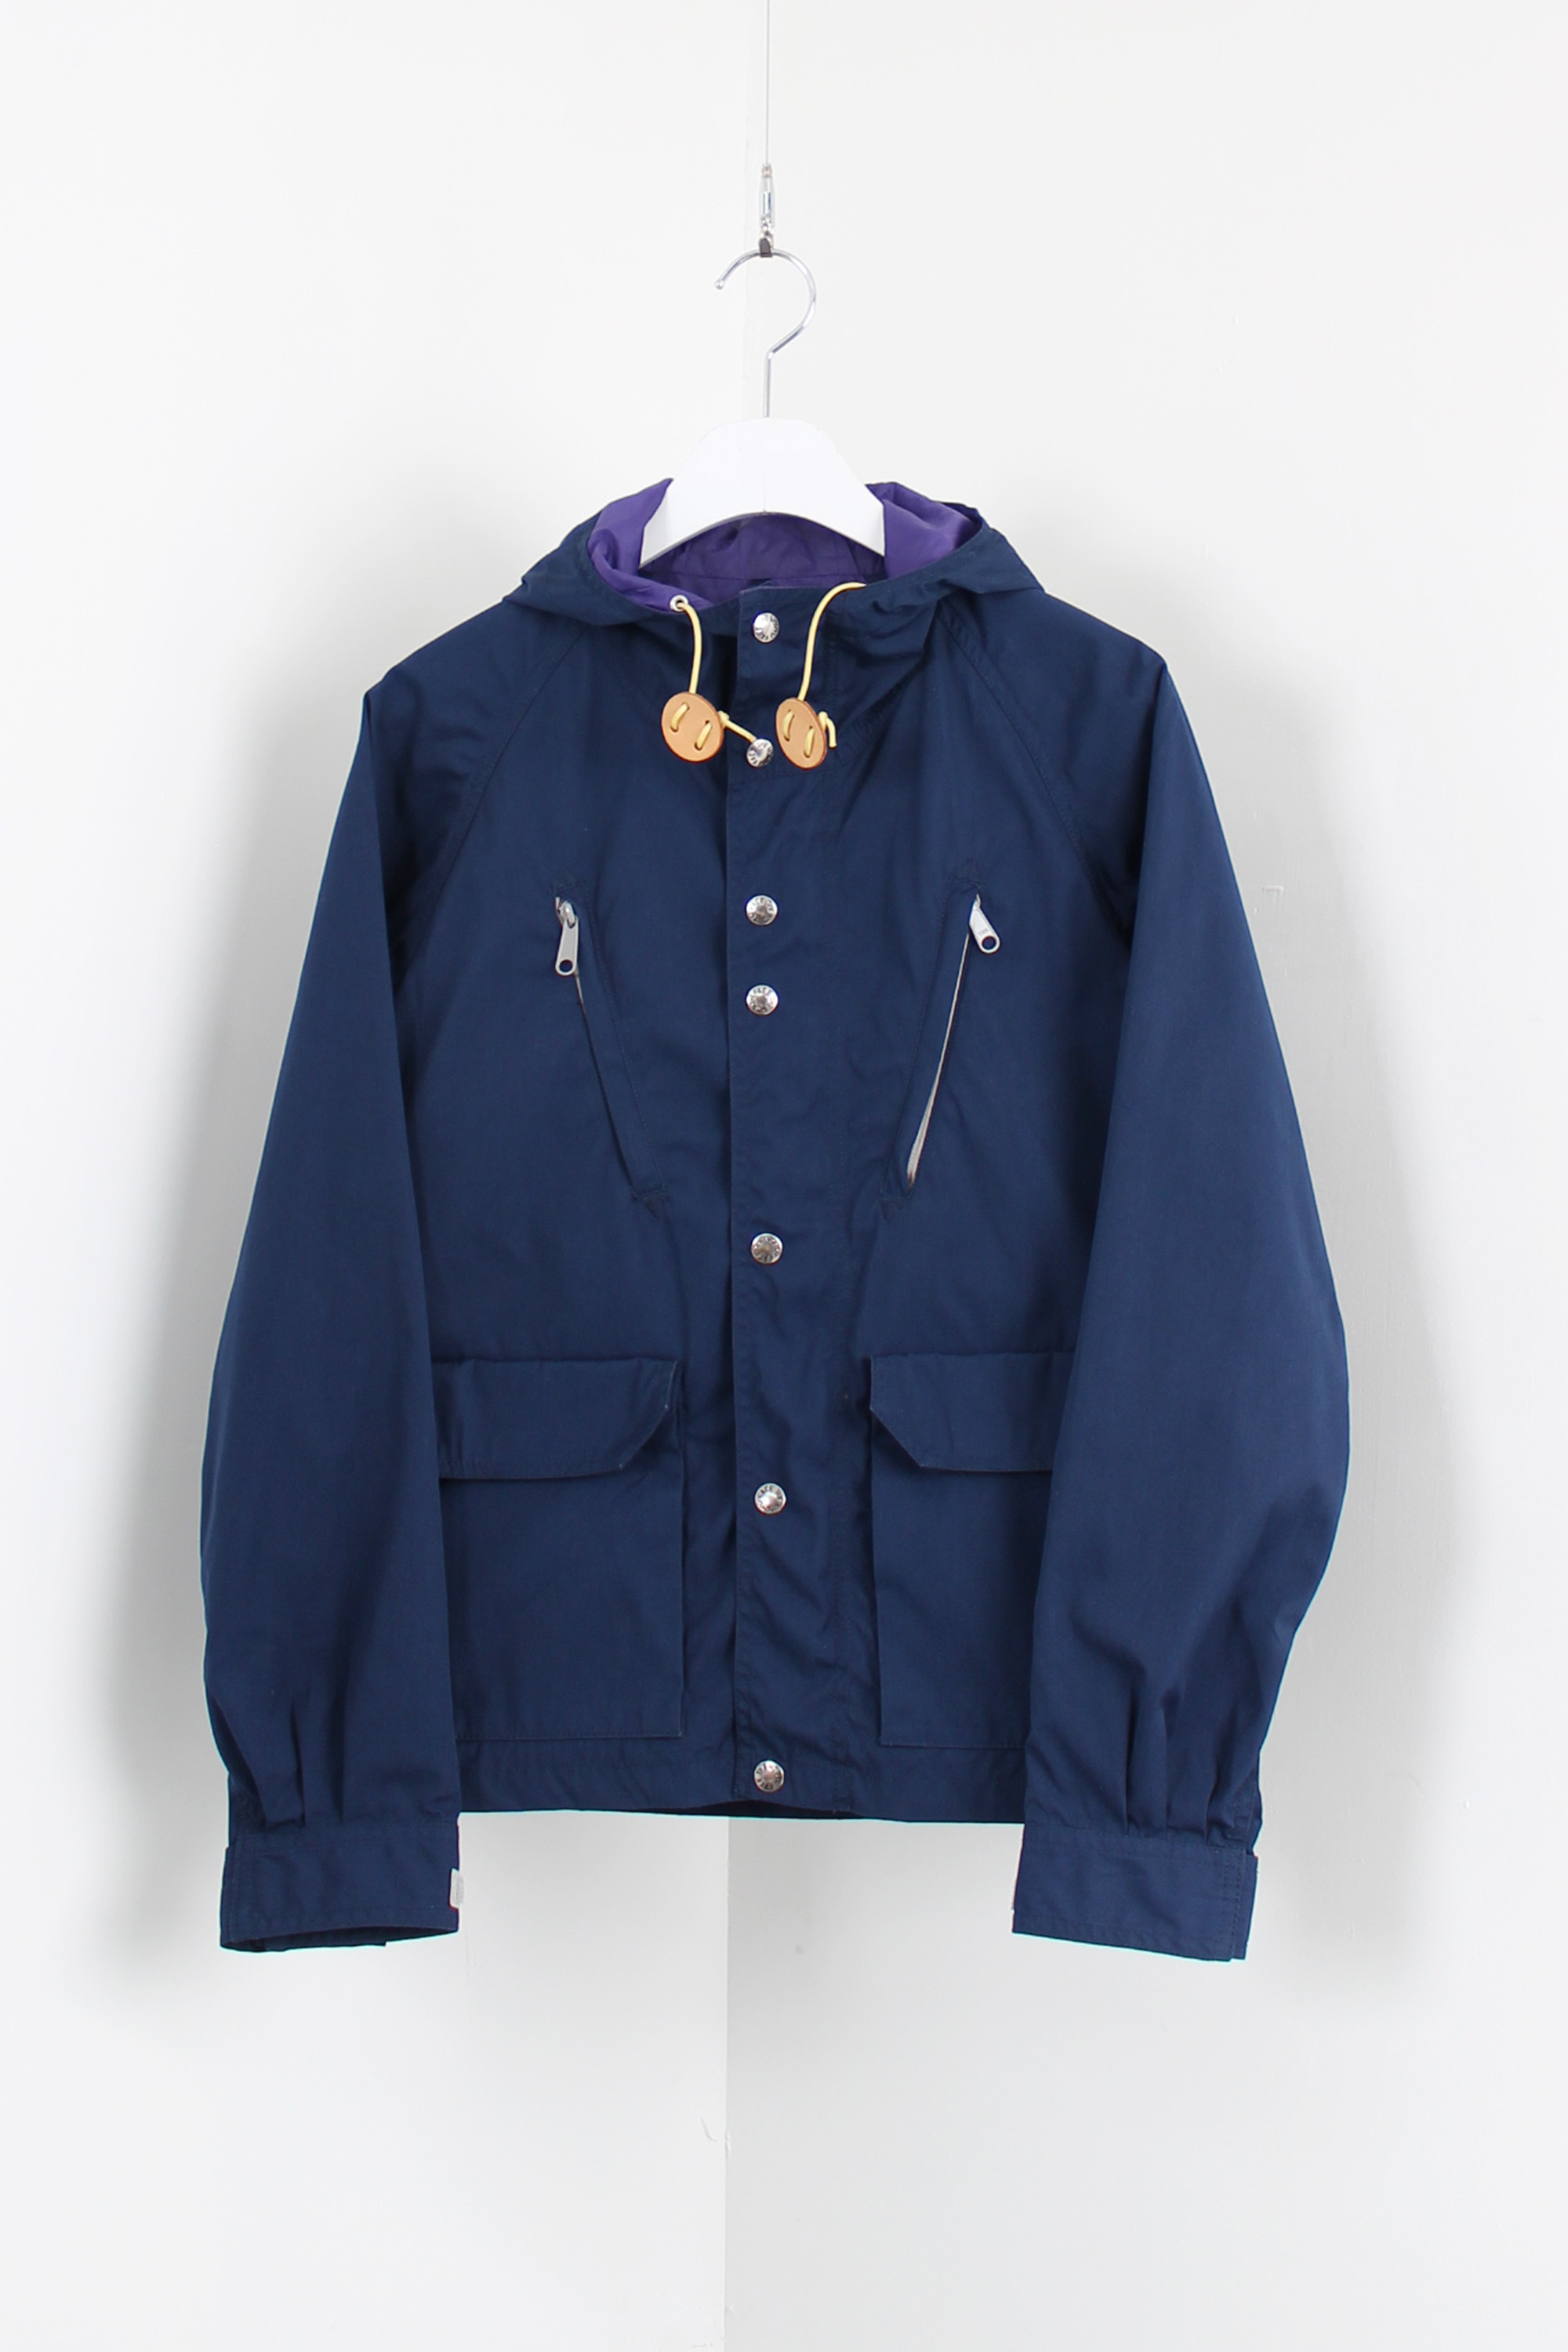 THE NORTH FACE PURPLE LABEL mountain jacket